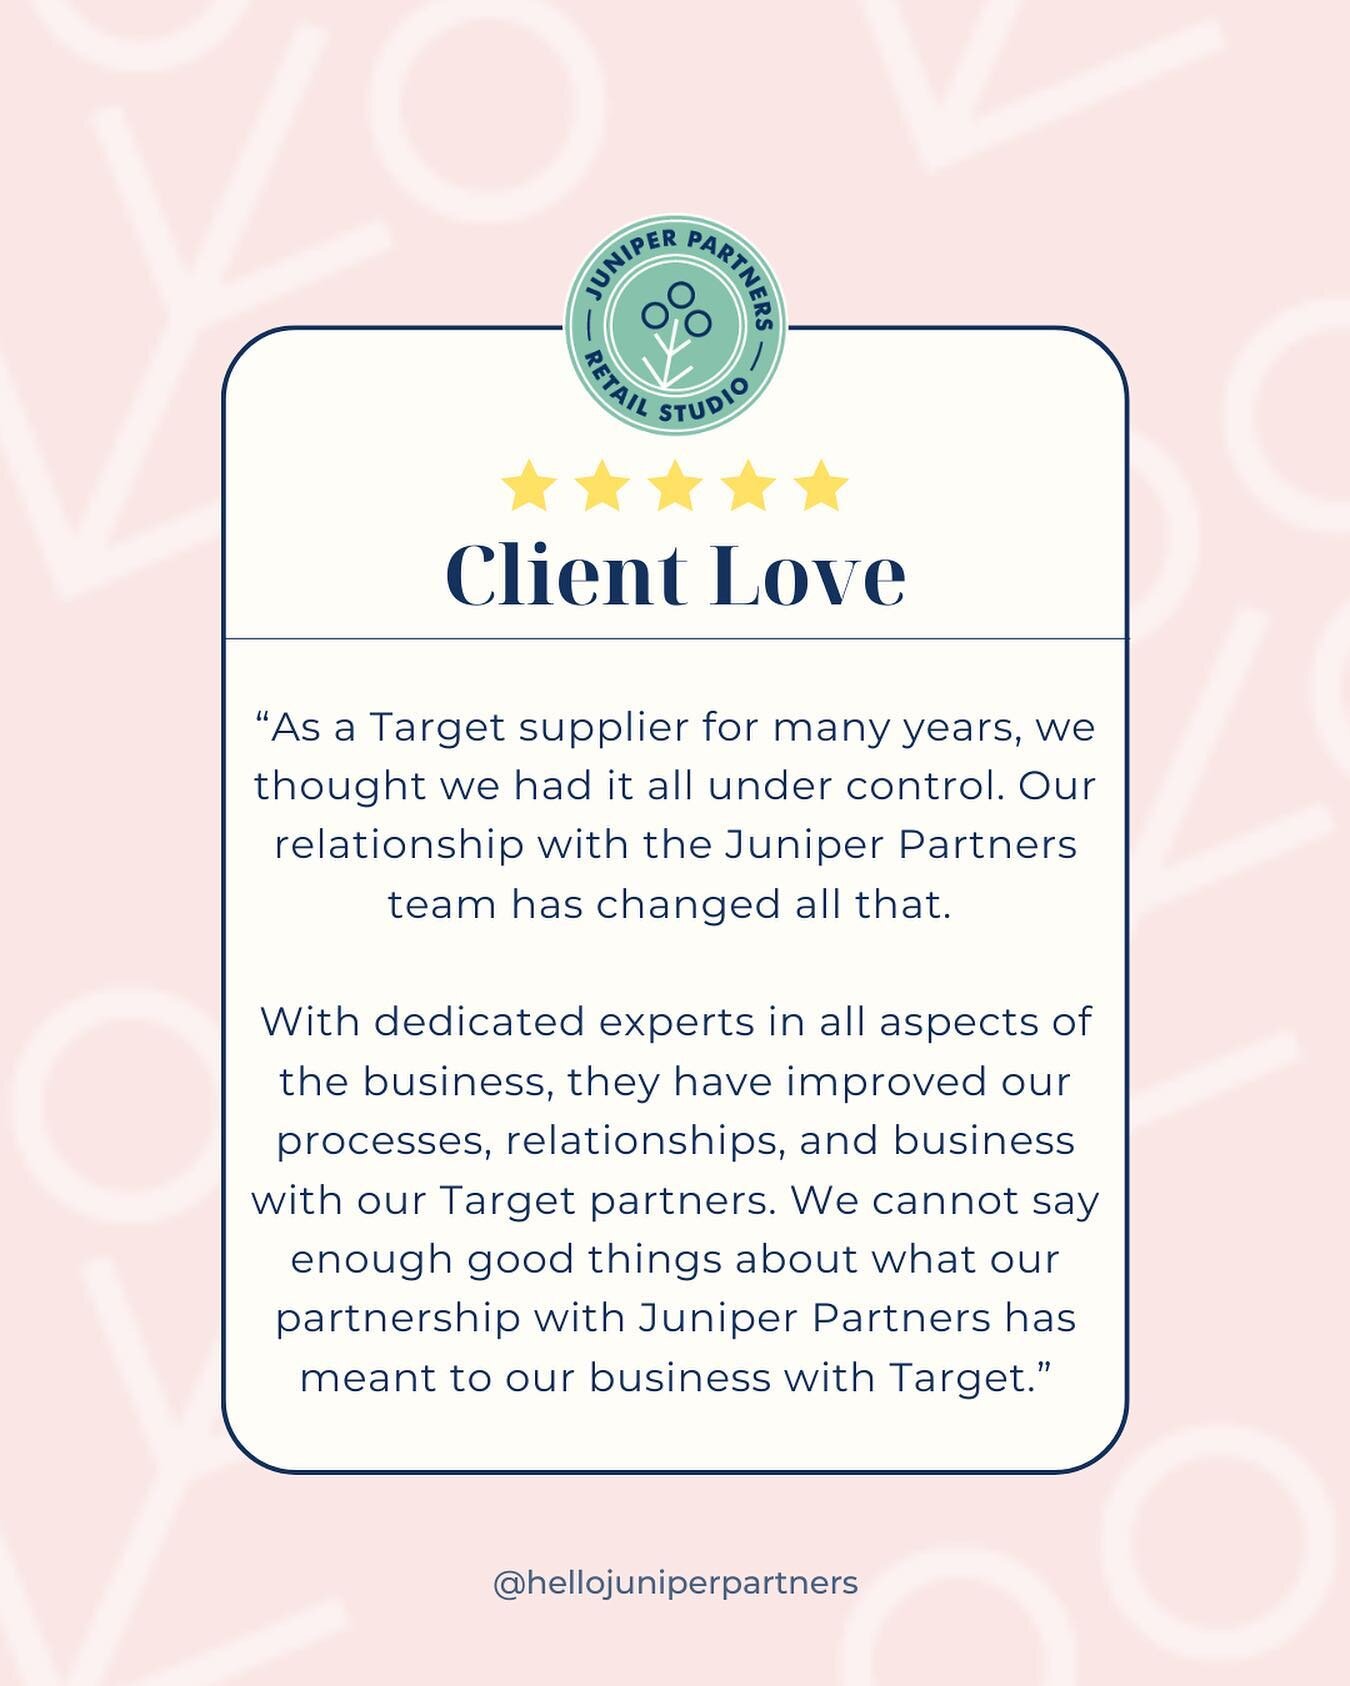 Feeling the love from our amazing clients!&nbsp;&nbsp;
&nbsp;
Our clients&rsquo; words speak louder than any caption could✨. Grateful for the trust and partnership in representing their brands at Target. Cheers to making dreams a reality together!🎯
